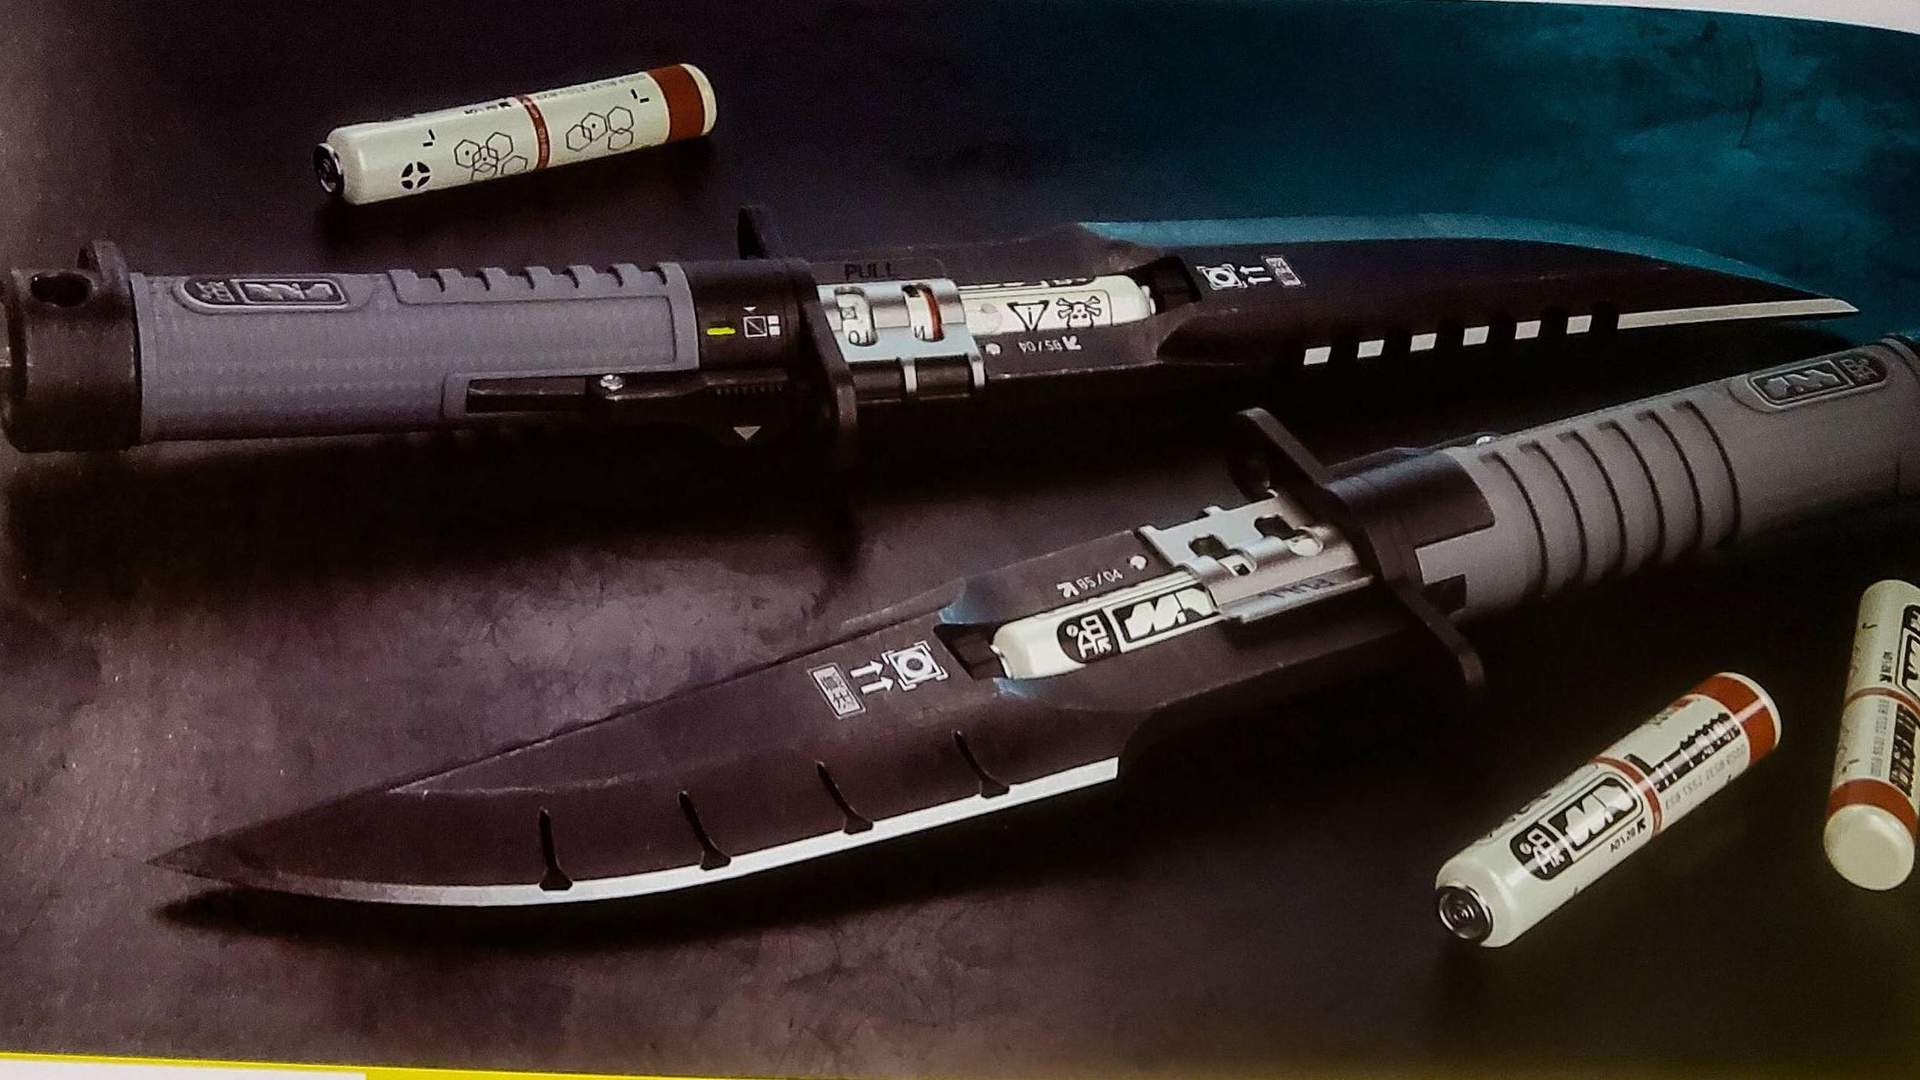 Sounds Like Cyberpunk 2077's Melee Weapons Can Be Coated With Toxins